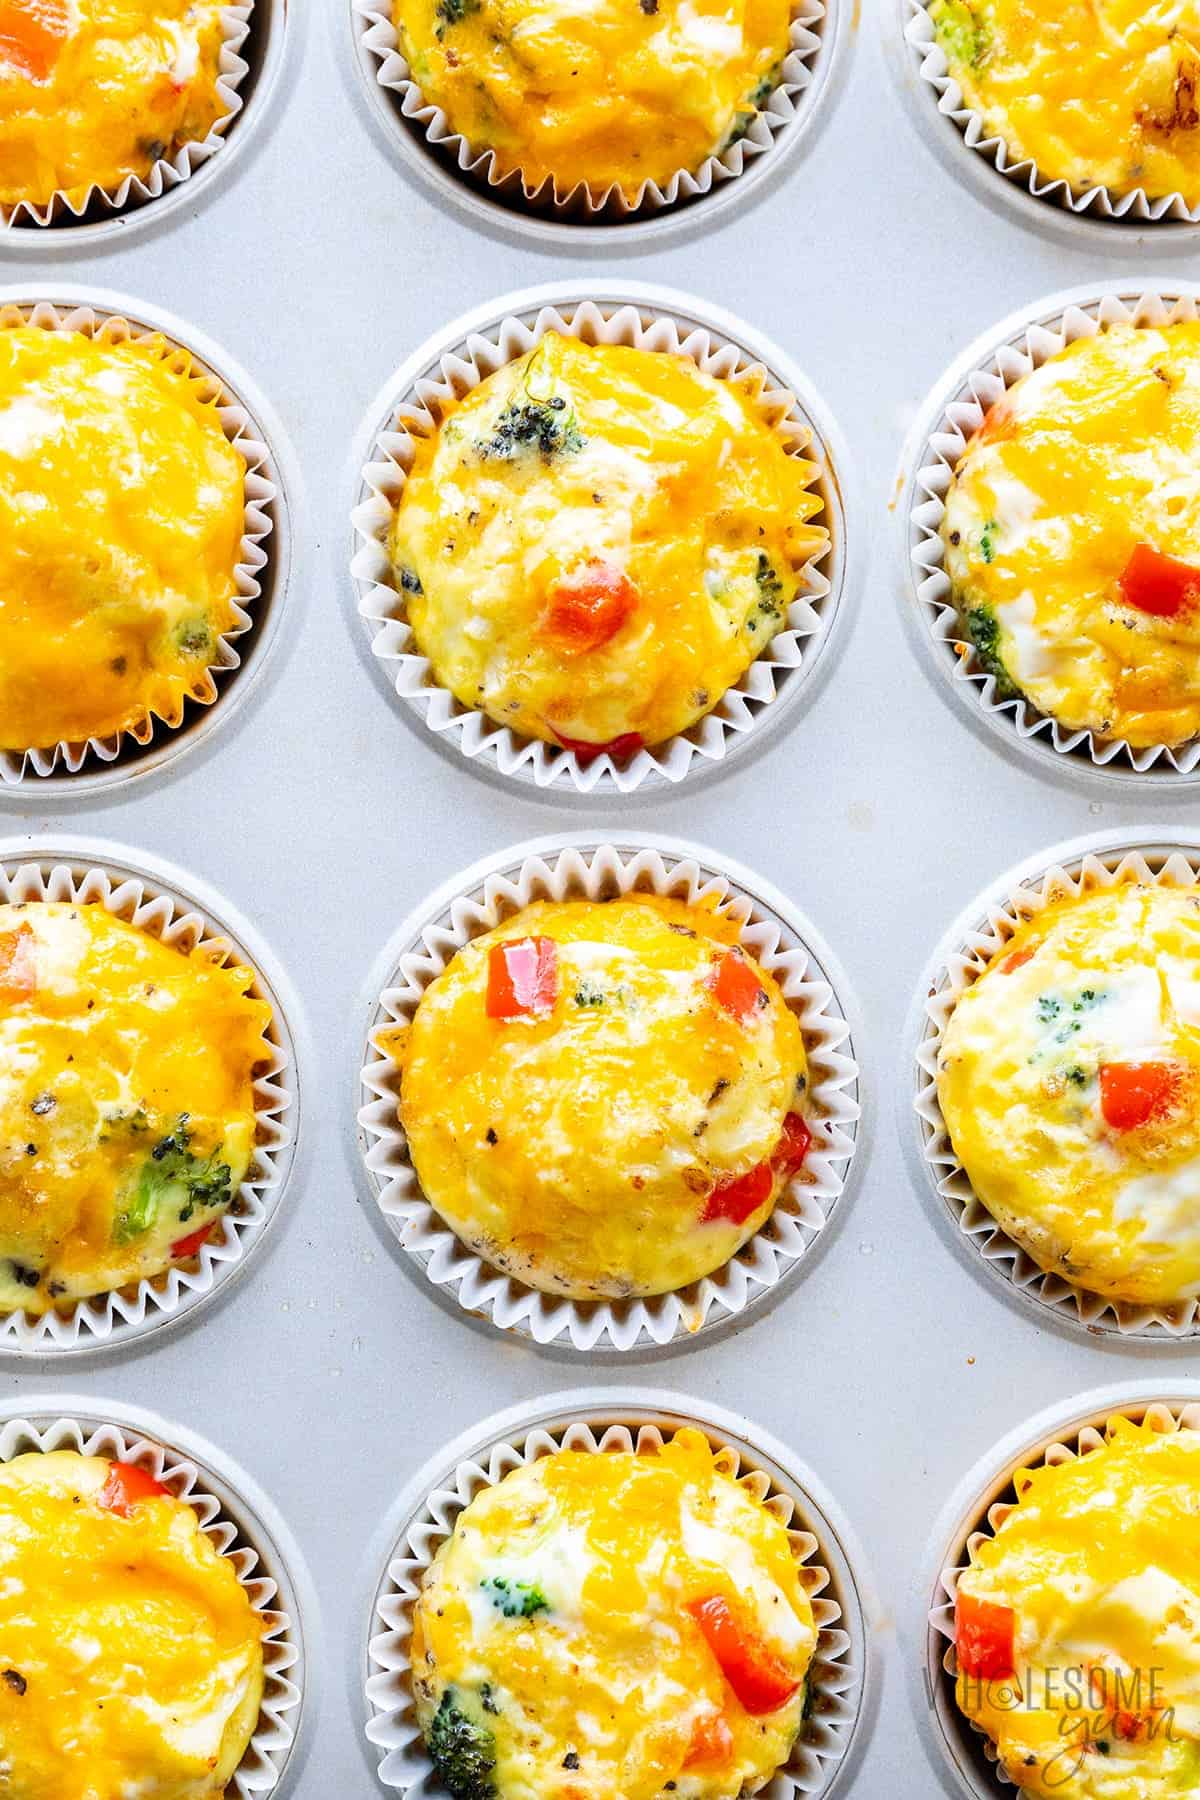 https://www.wholesomeyum.com/wp-content/uploads/2020/12/wholesomeyum-Low-Carb-Keto-Egg-Muffins-Egg-Muffin-Cups-Recipe-11.jpg